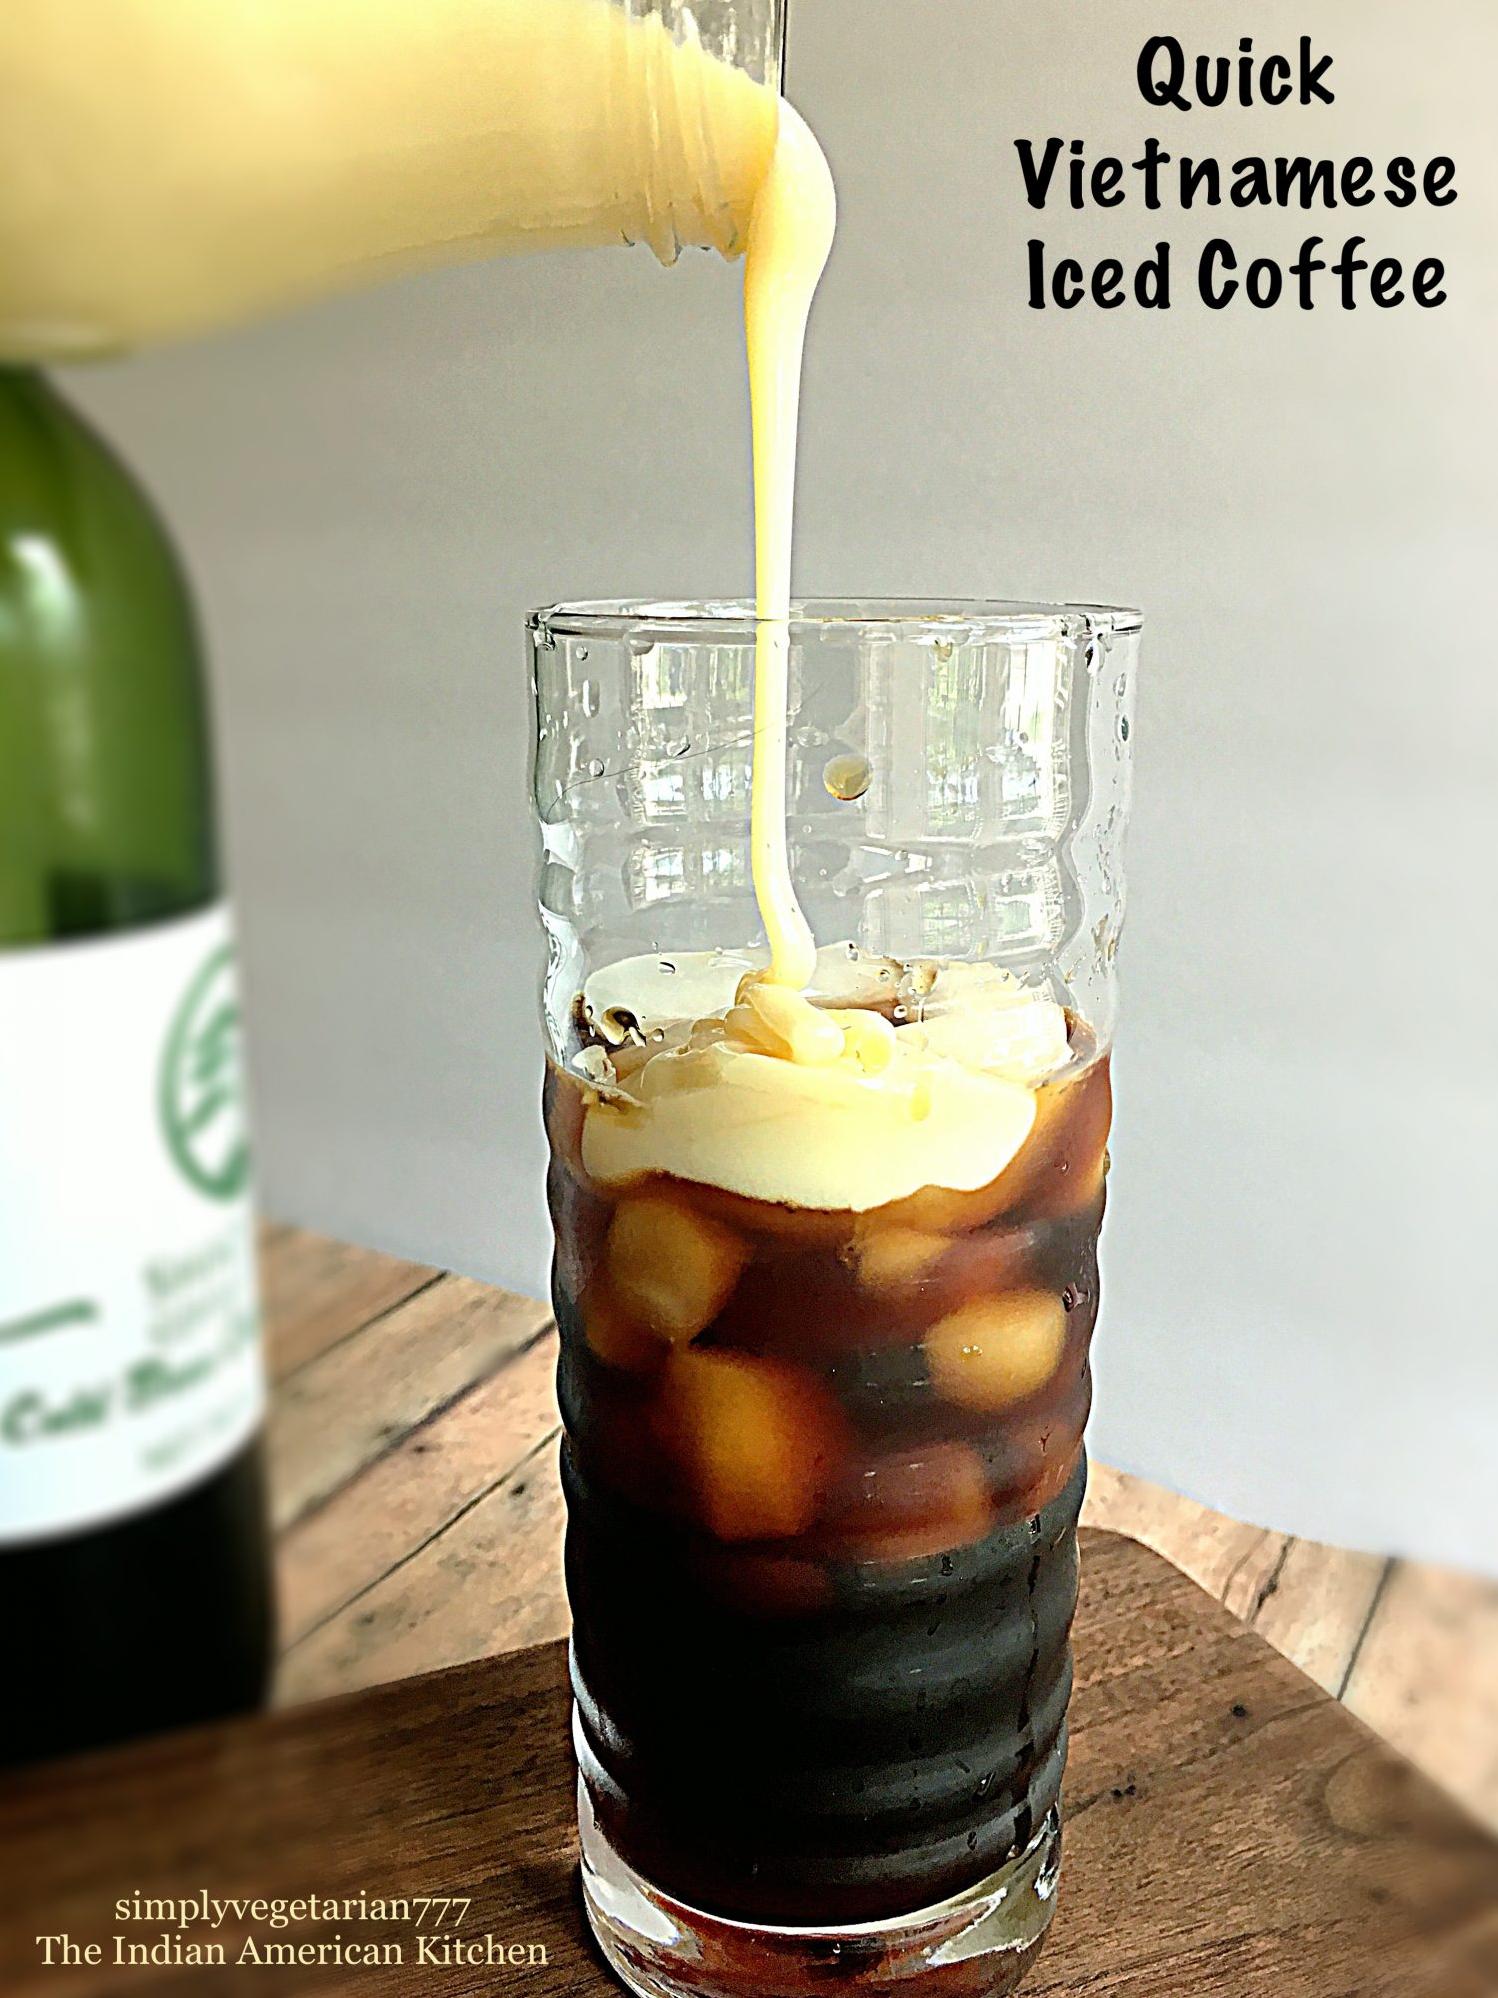  Satisfy your sweet tooth and caffeine cravings in one drink.